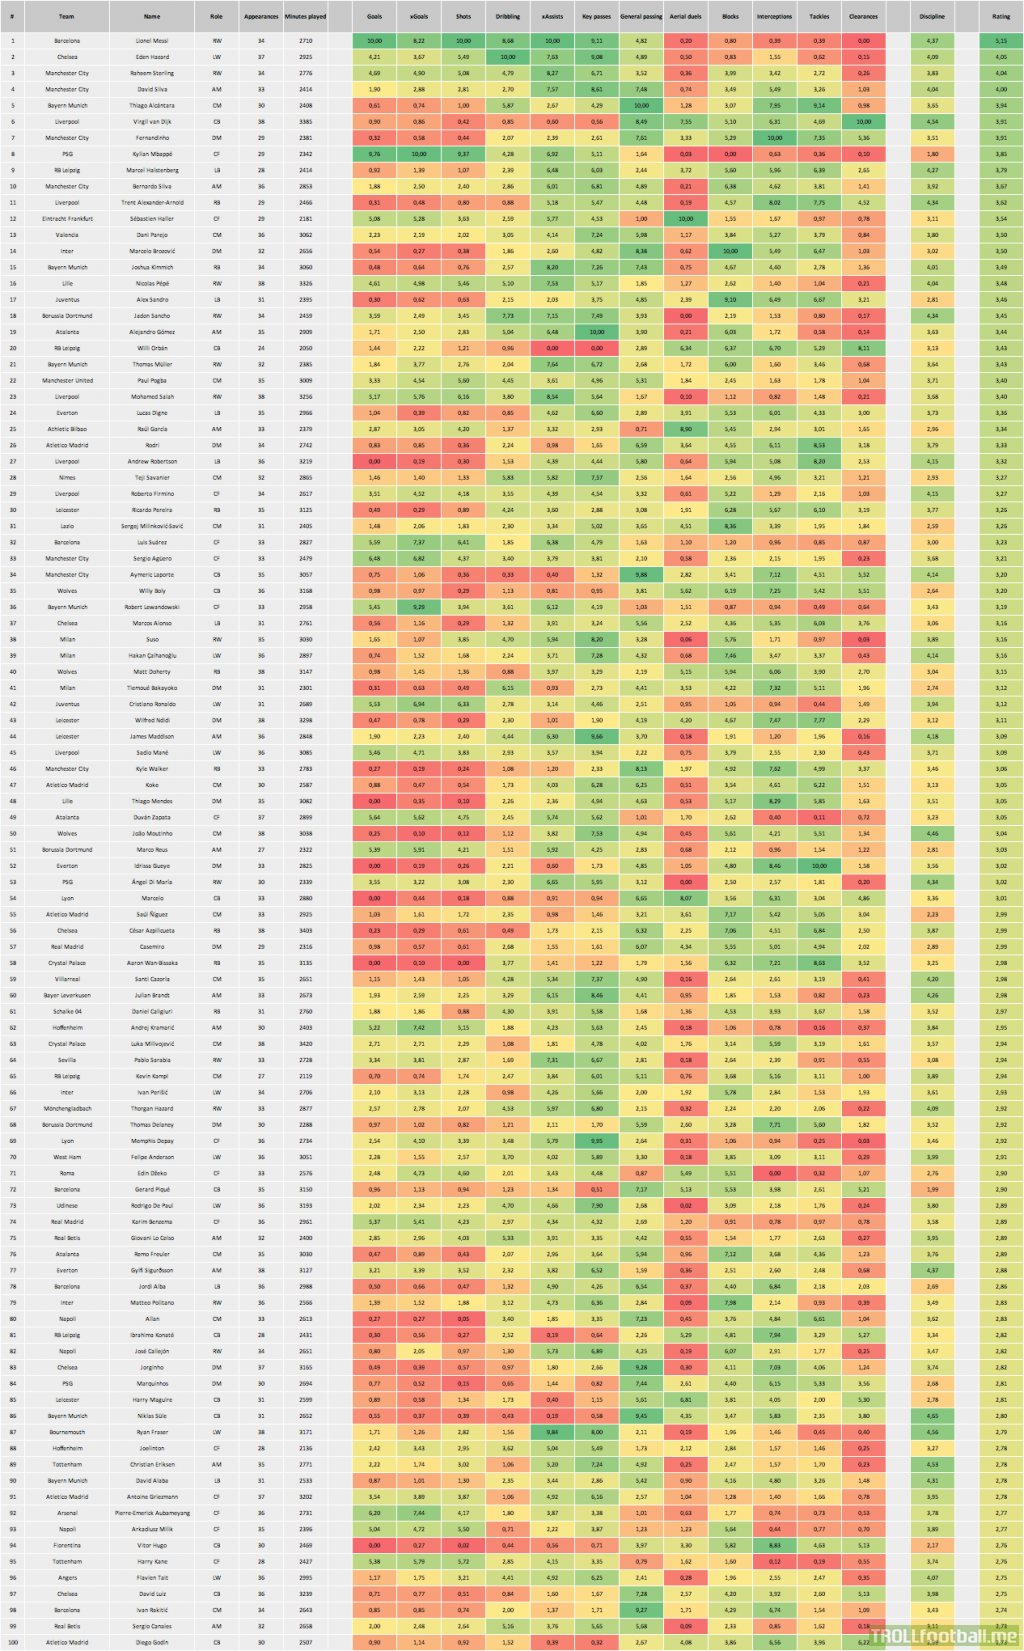 [OC] Visual comparison of the 100 most statistically impressive performance from the 18/19 season in the top five leagues. (Normalized using feature scaling around minutes played, goals+xGoals conceded per minute, as well as average opponent ELO)